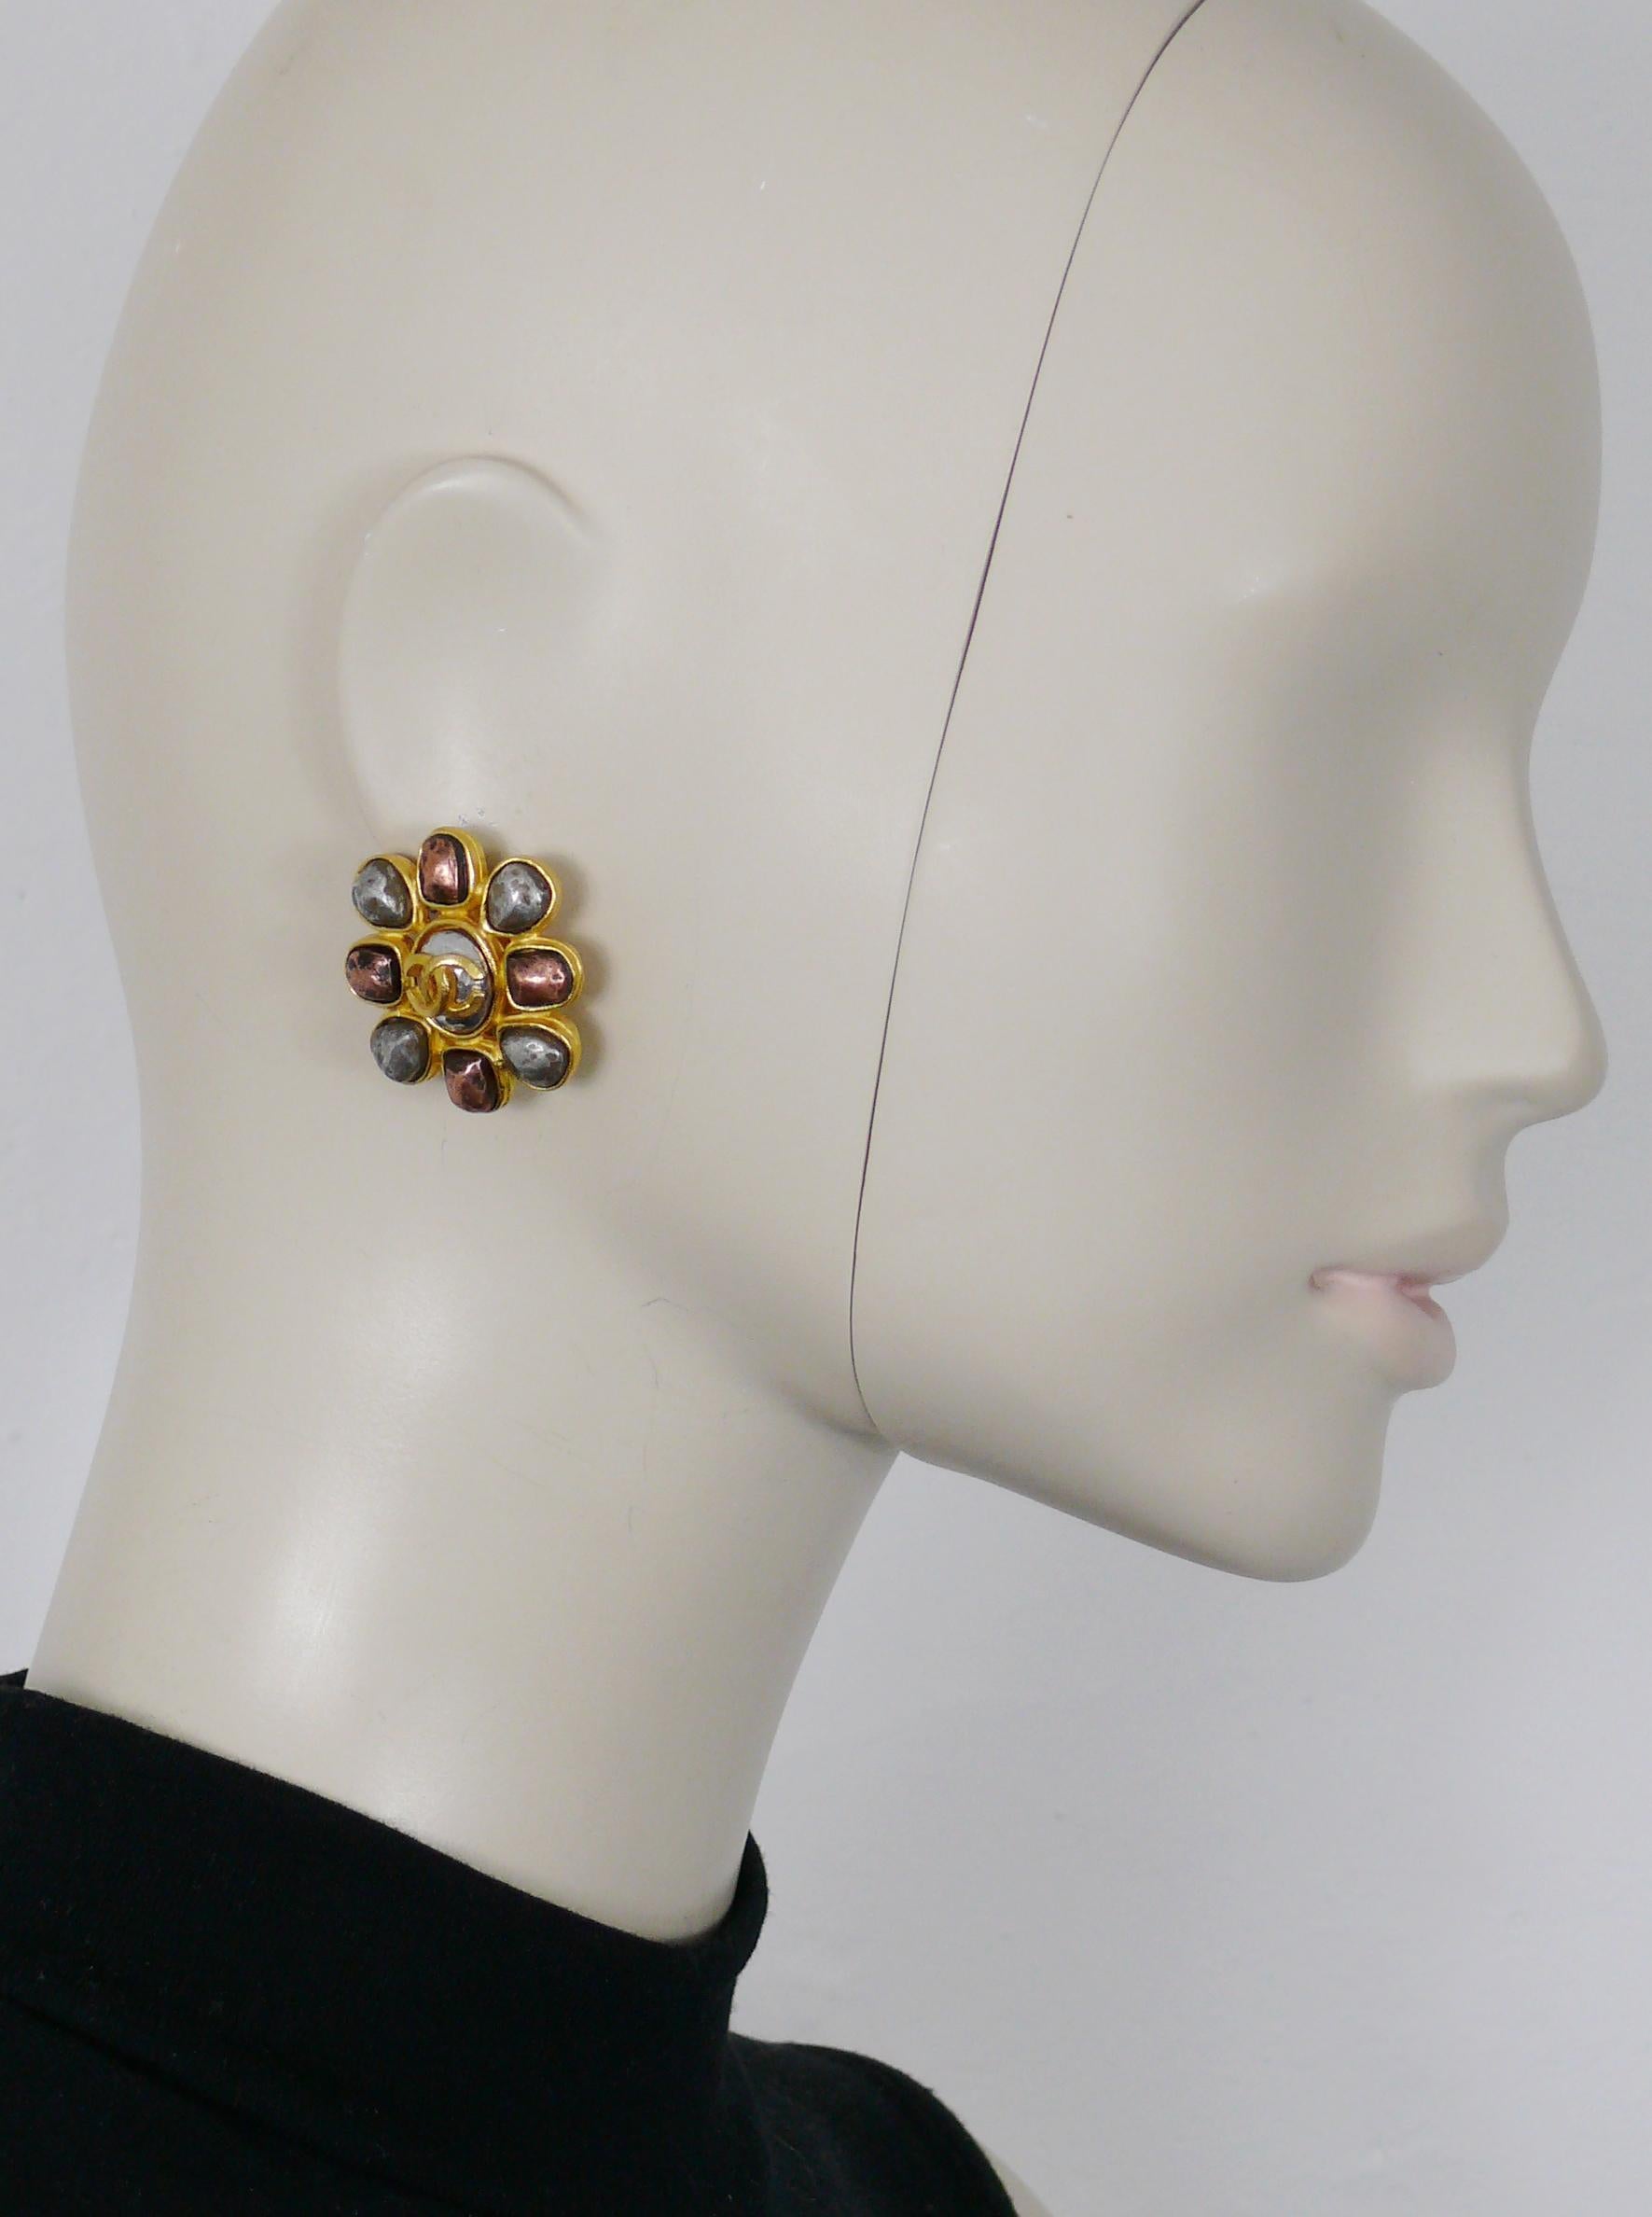 CHANEL by KARL LAGERFELD vintage gold toned clip-on earrings featuring a stylized flower embellished with distressed copper and silver toned metal cabochons. CC logo at center.

Fall 1997 Collection.

Embossed CHANEL 97A Made in France.

Indicative